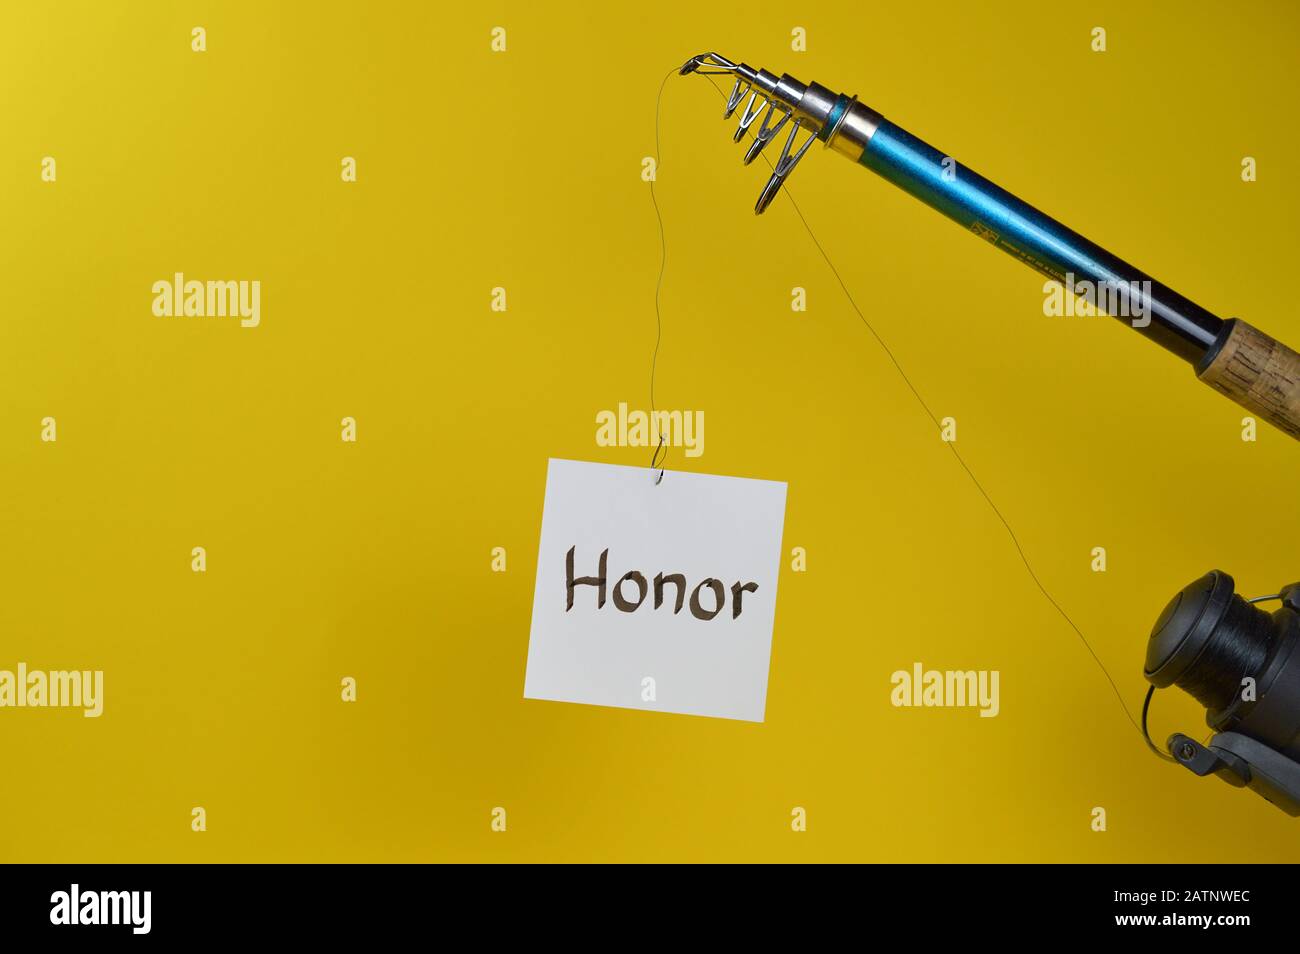 fishing line with piece of paper hanging of as symbol for temptation in front of yellow background Stock Photo